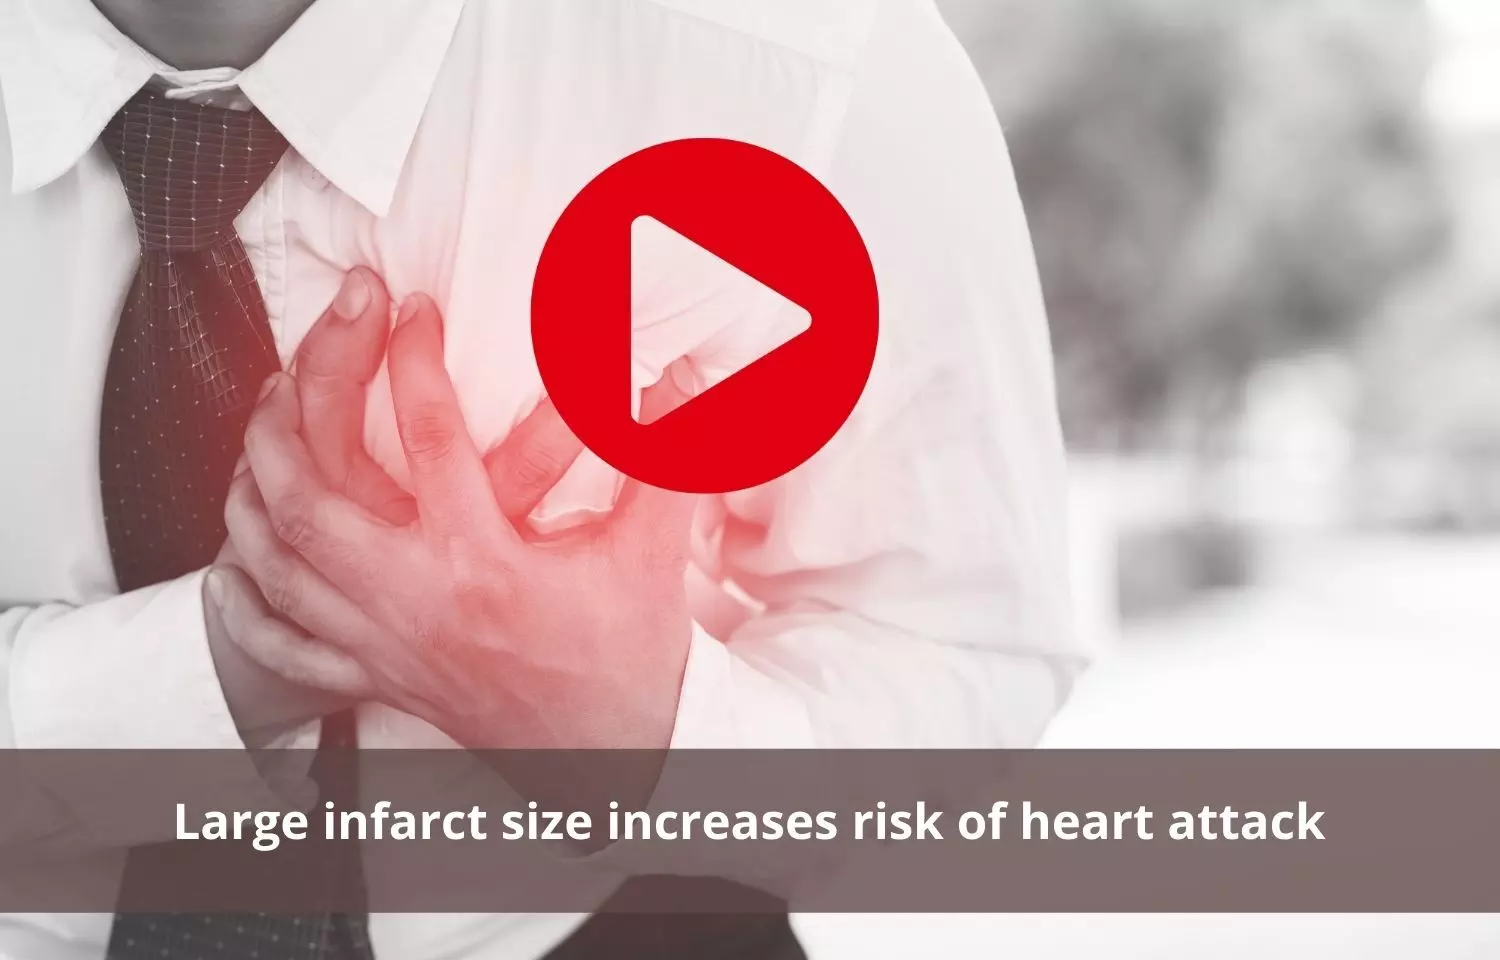 Infarct size of fibrocytes to increase risk of heart attack